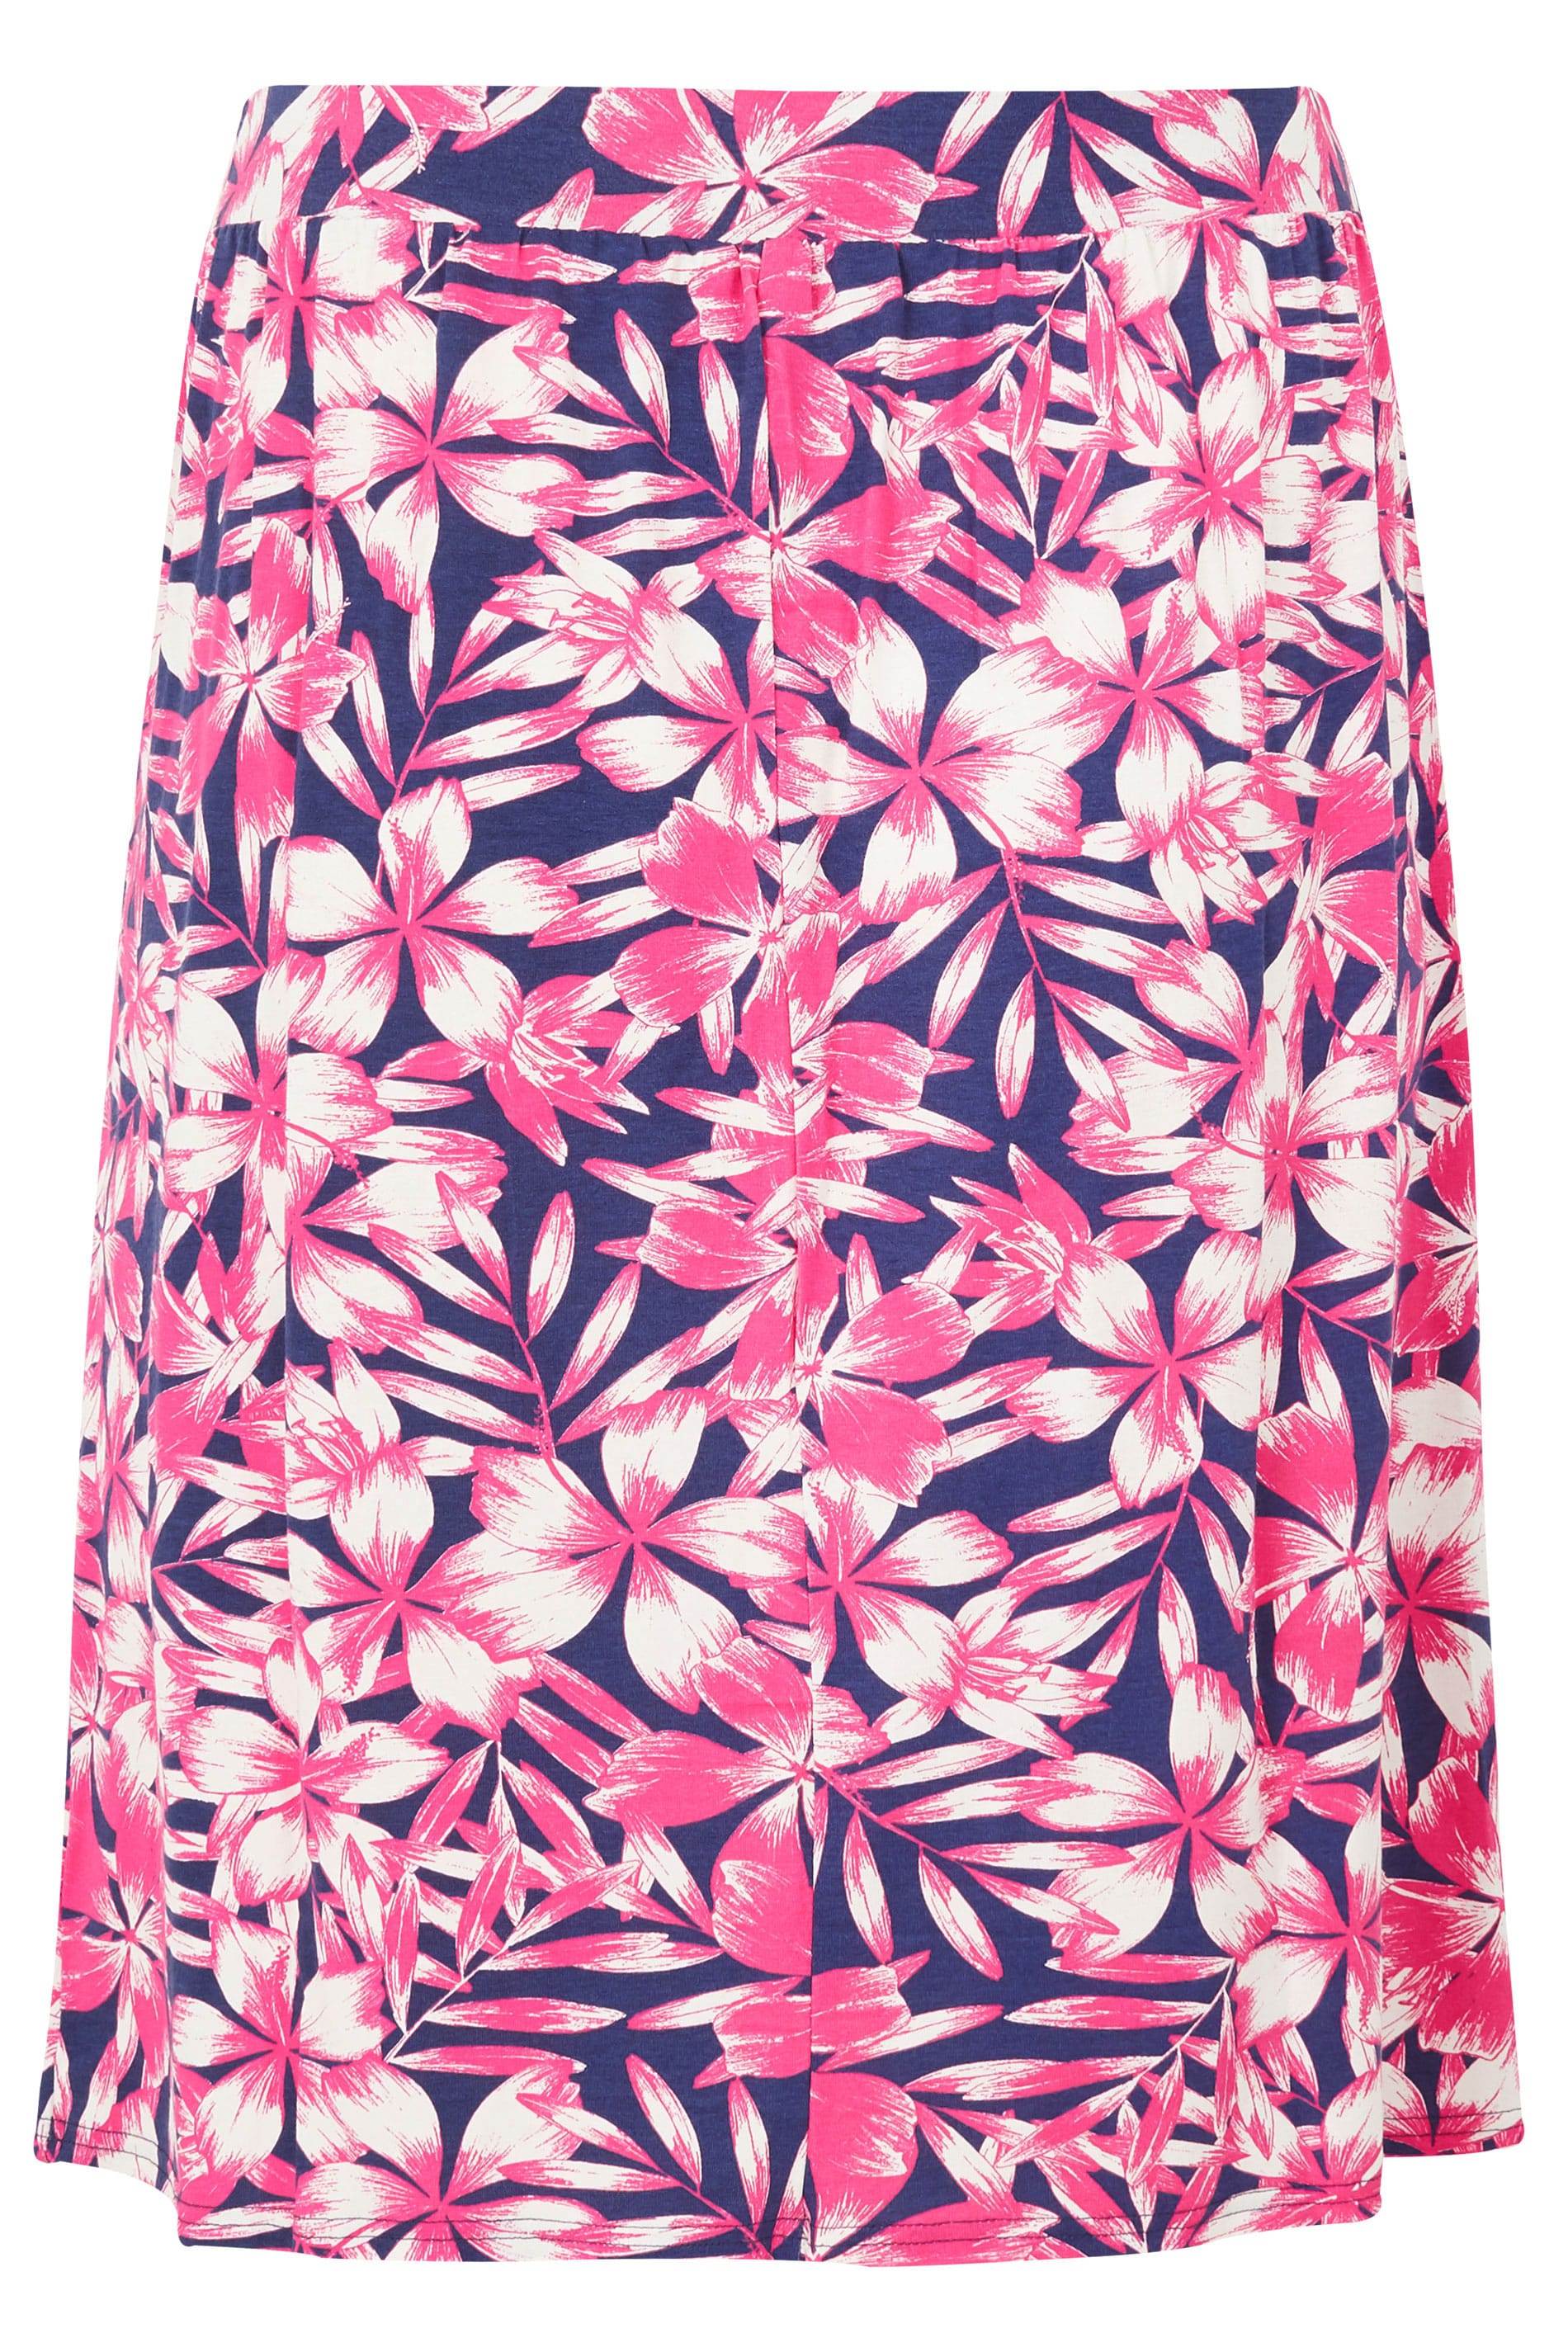 Pink & Navy Floral Print Drape Skirt With Pockets, plus size 16 to 36